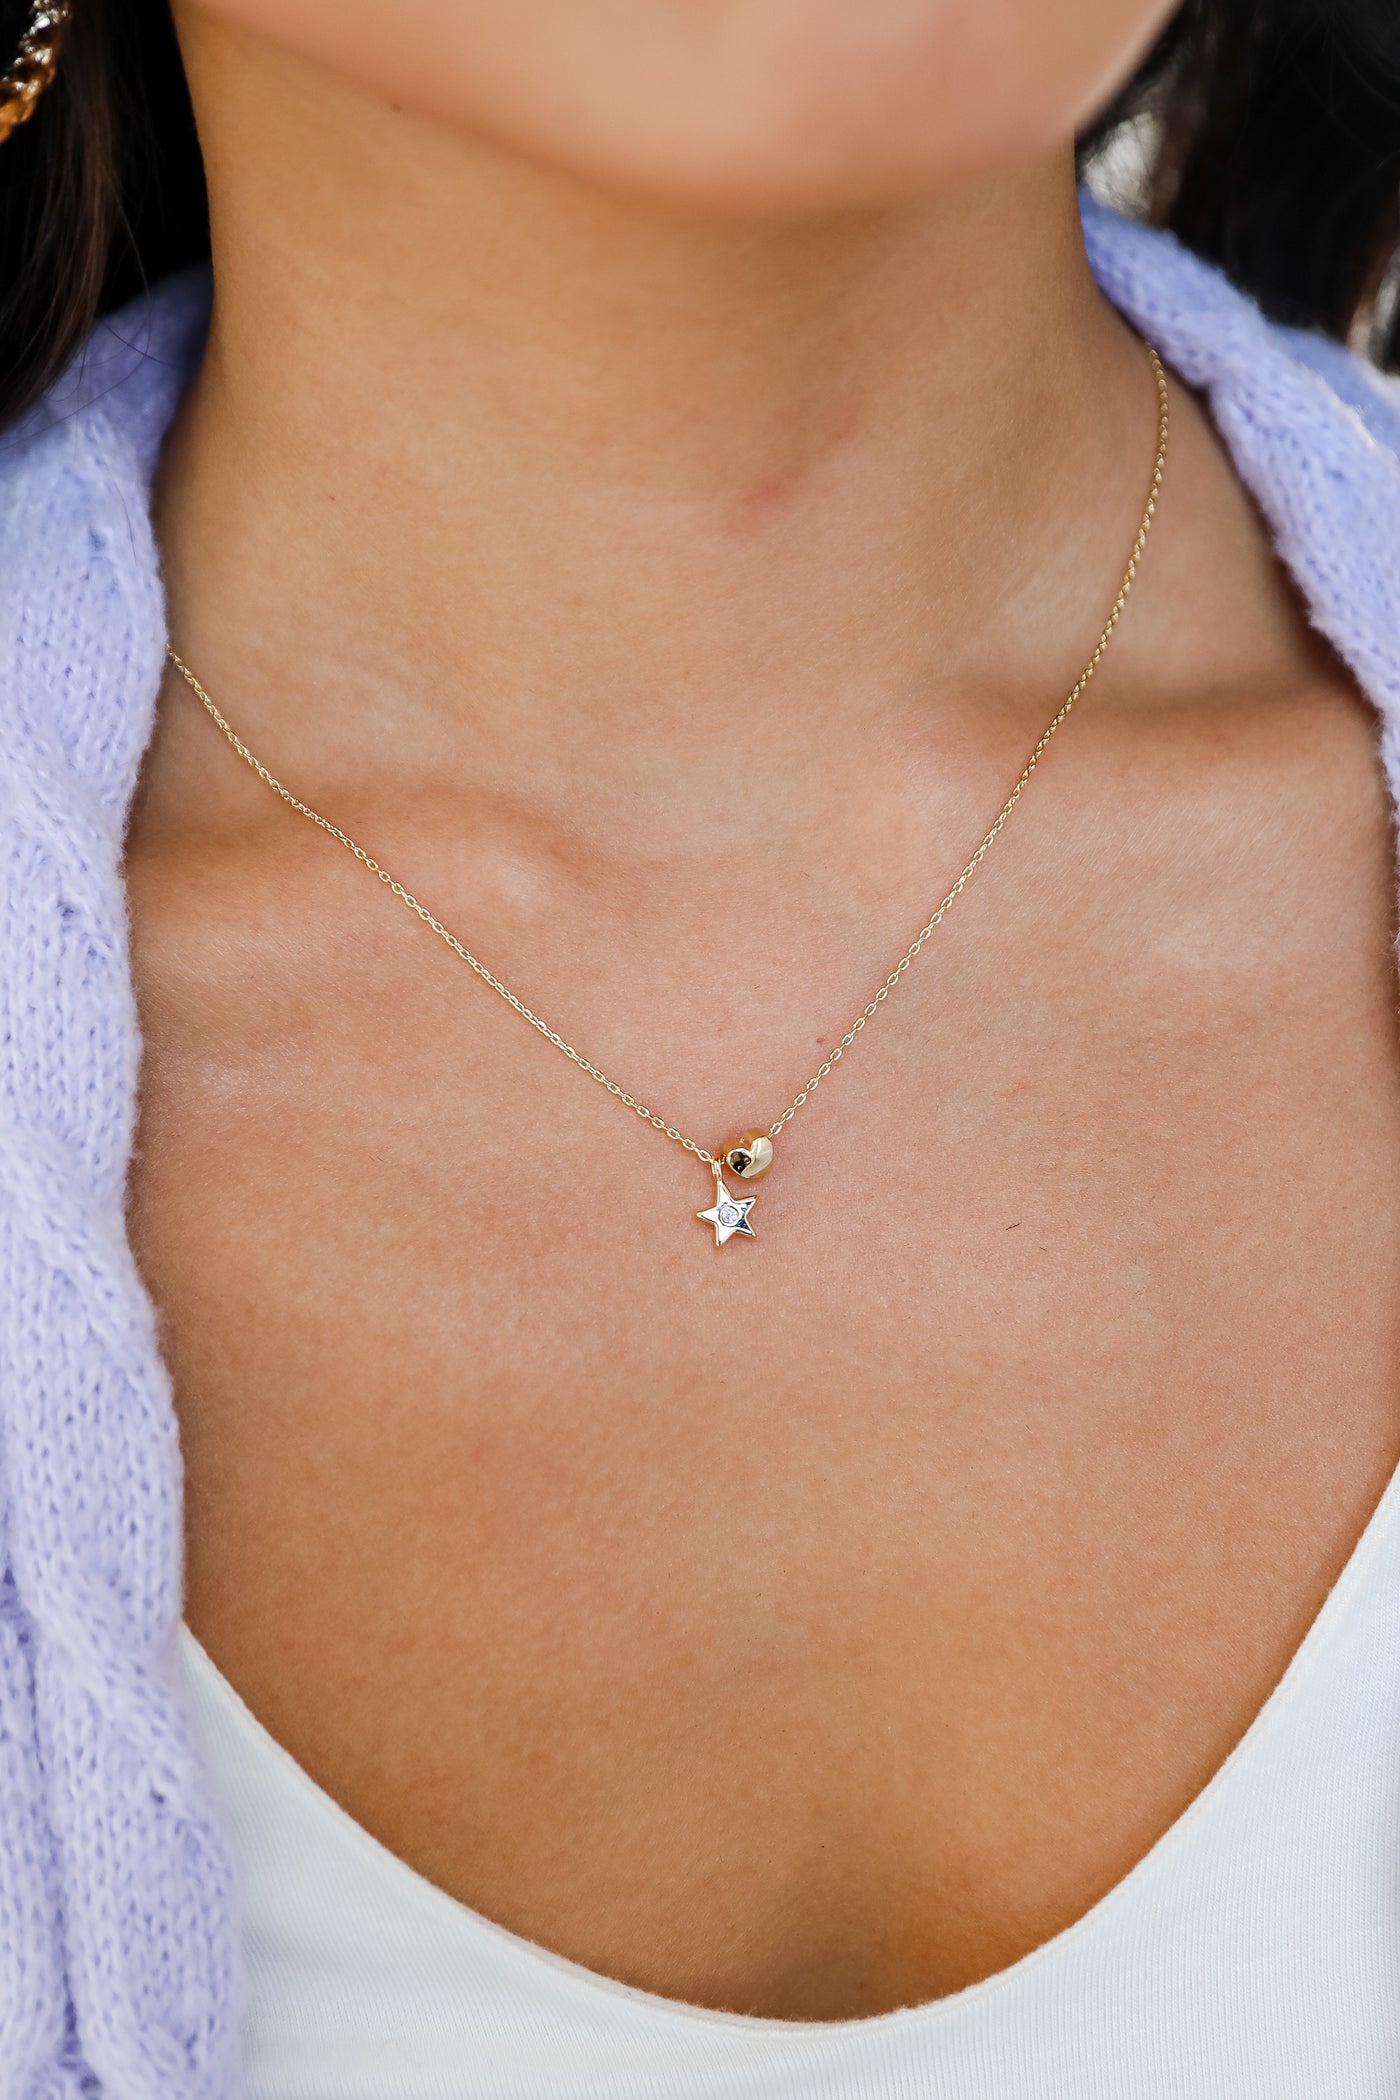 Gold Star + Heart Charm Necklace